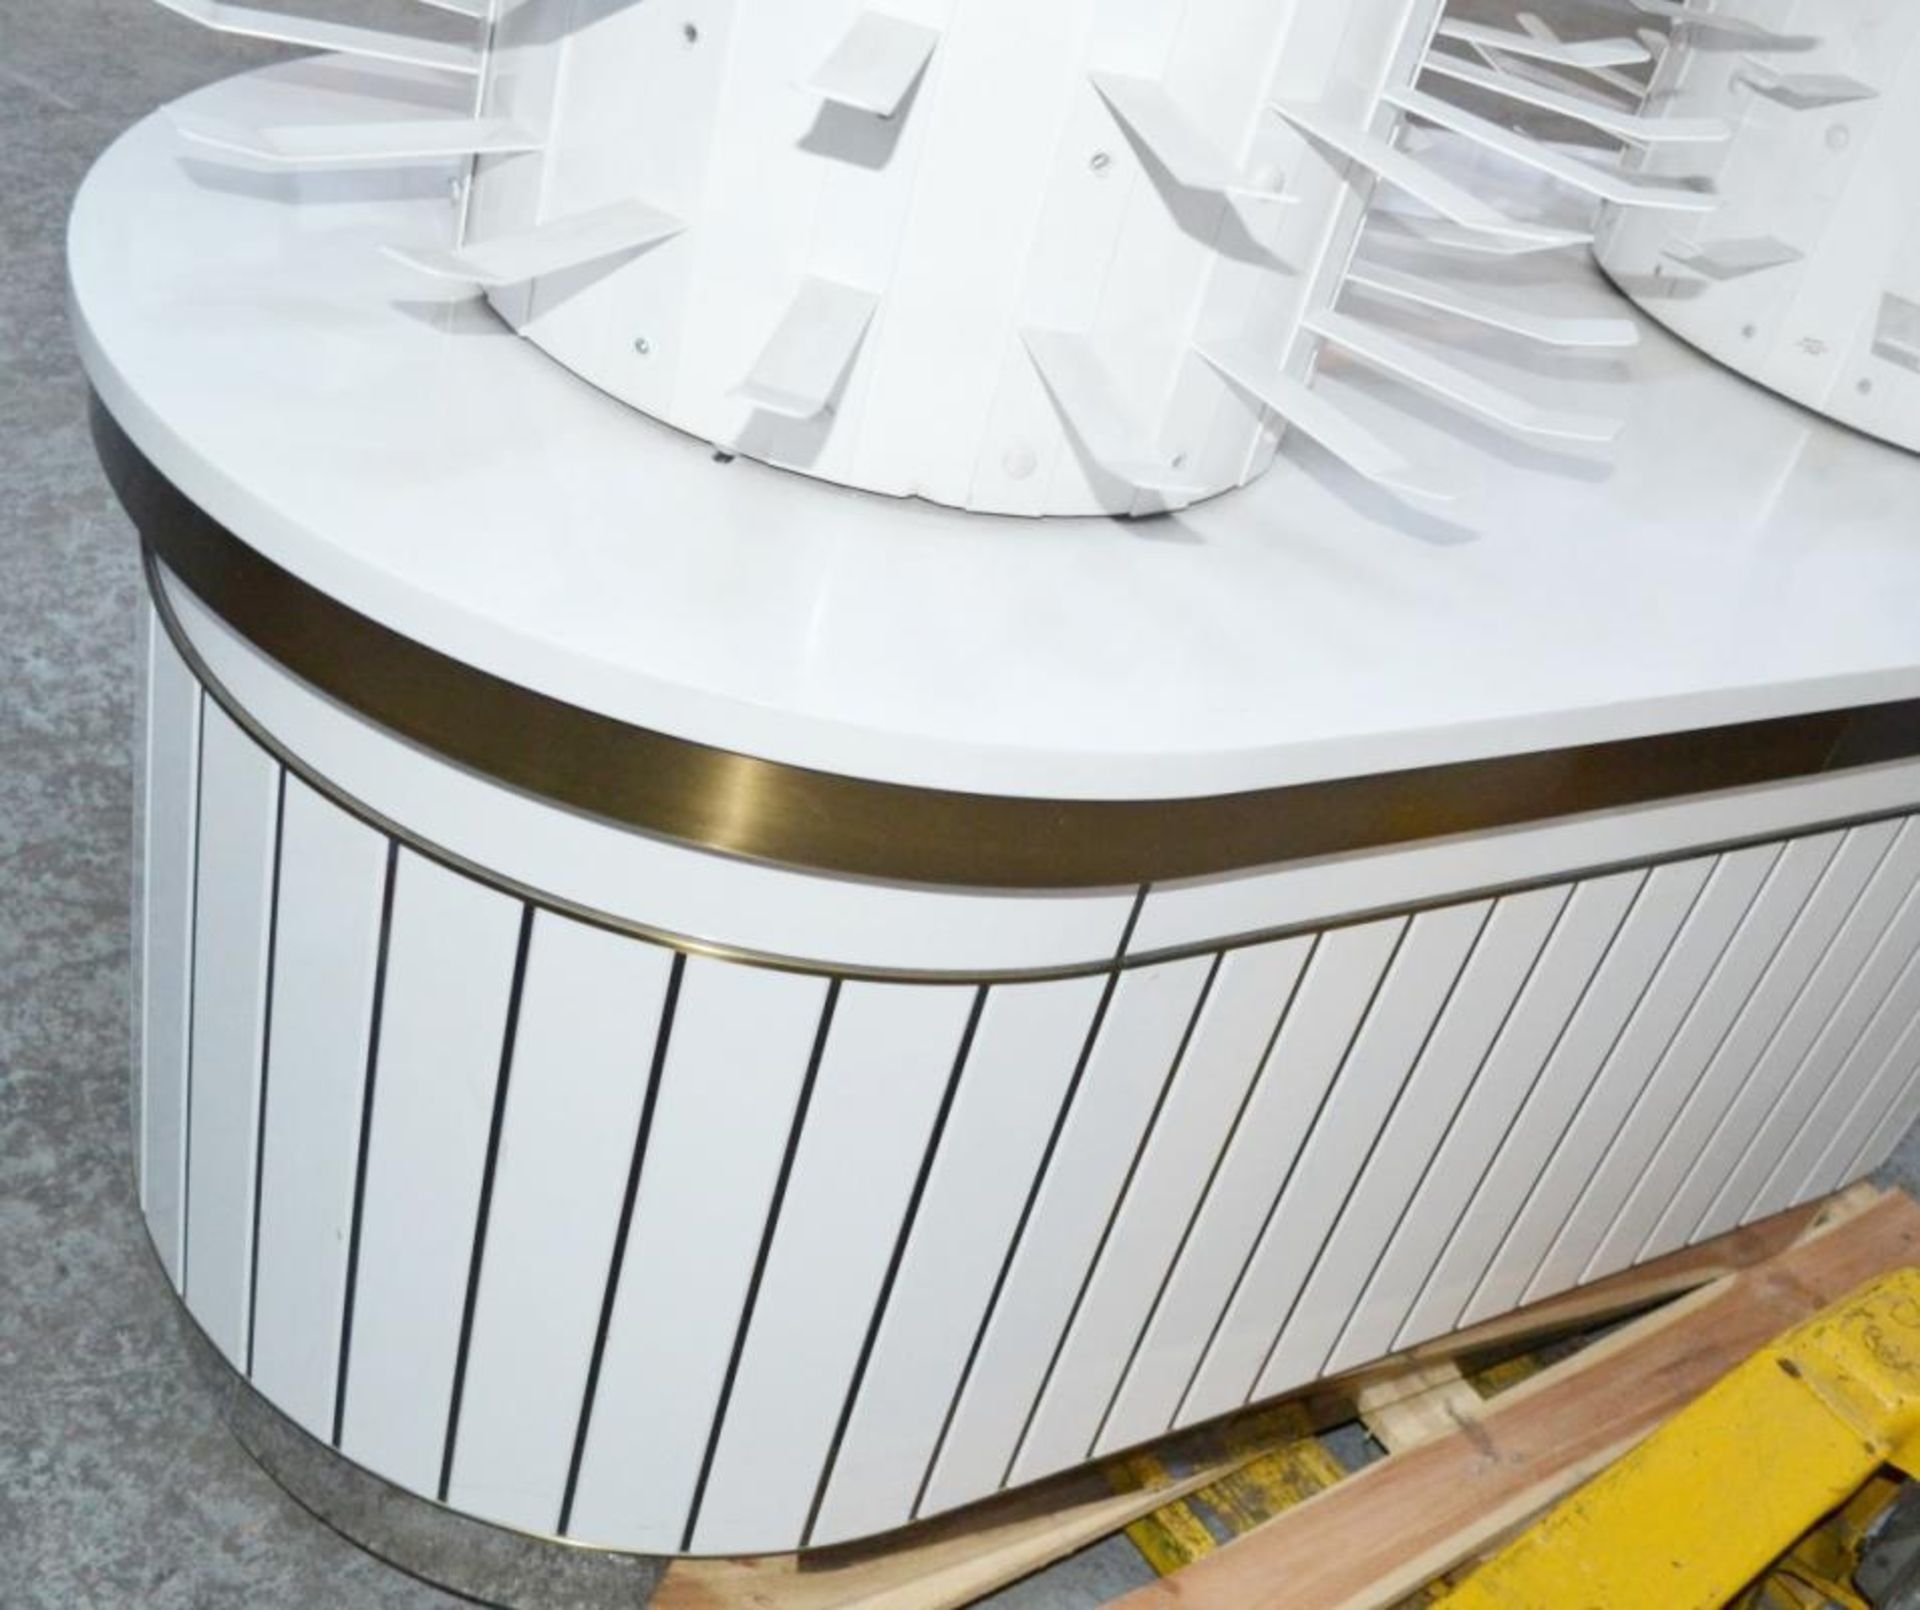 A Pair Of Curved Cosmetics Shop Counters With Revolving Carousels In White - Recently Removed From H - Image 5 of 8